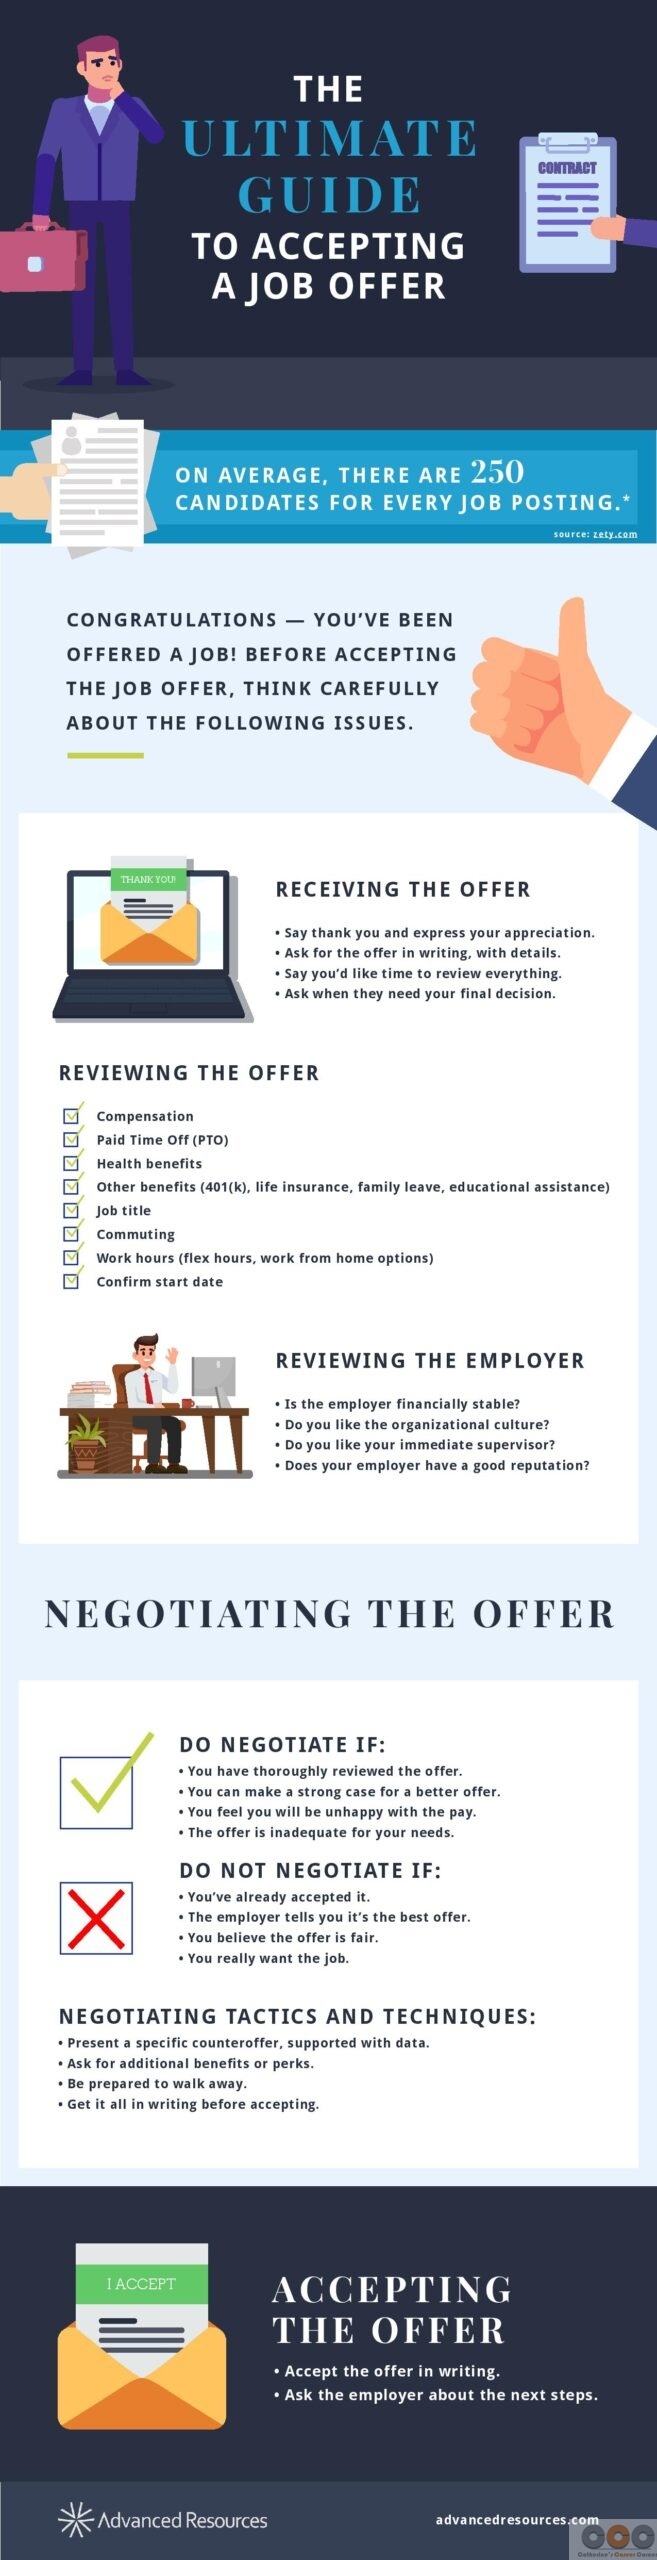 Your Guide to Accepting a Job Offer